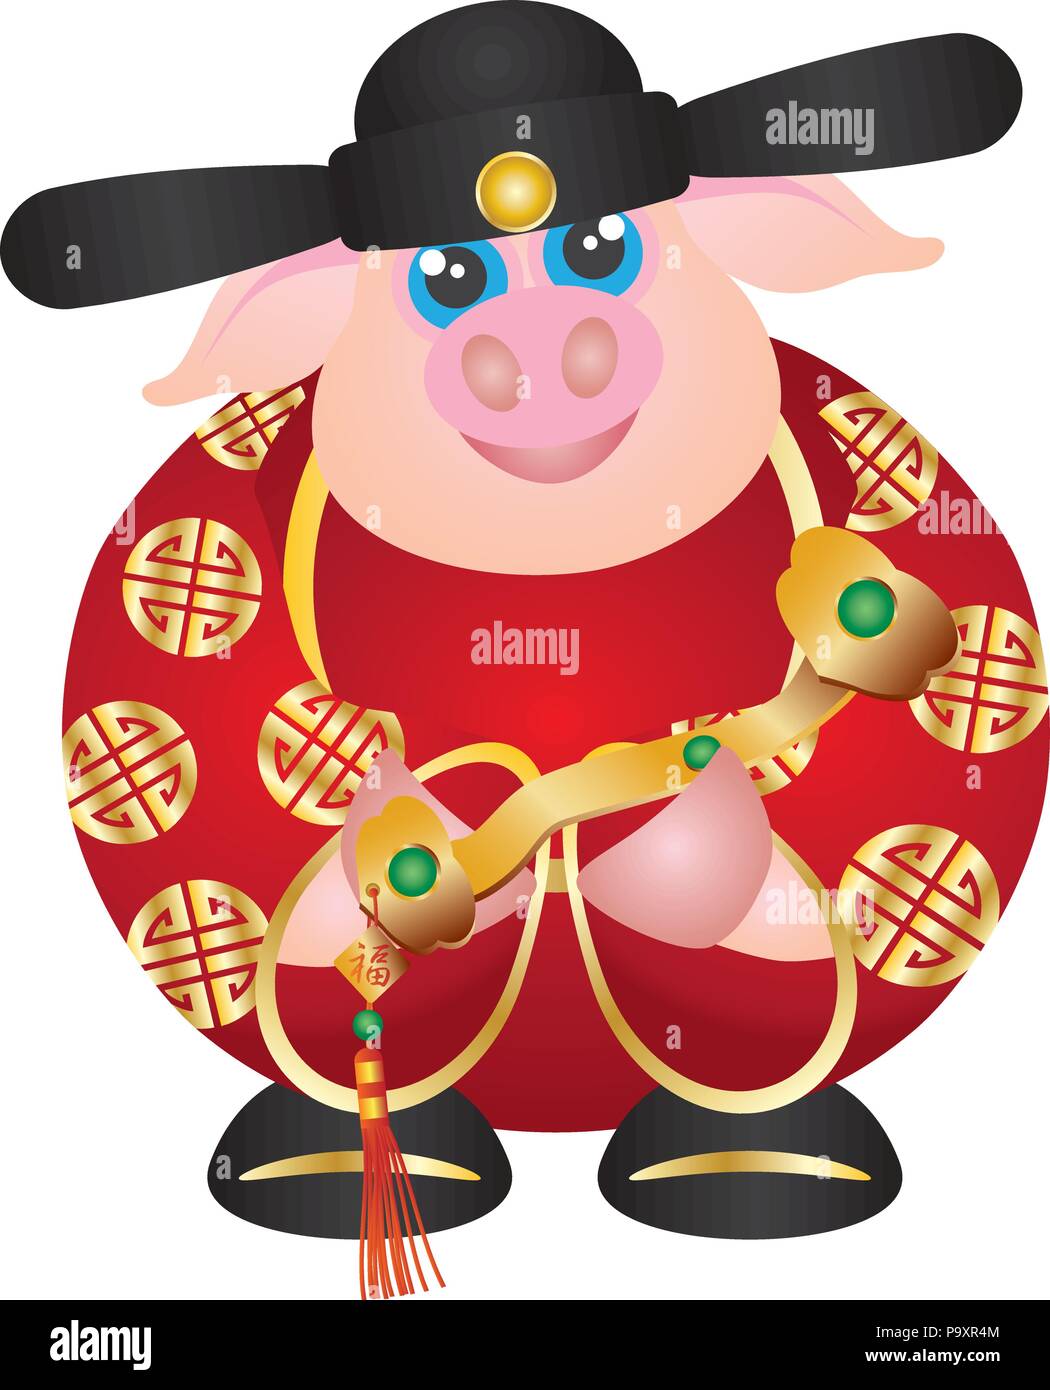 2019 Happy Chinese Lunar New Year of the Pig Prosperity Money God Holding Ruyi Scepter with Prosperity Text Illustration on White Background Stock Vector